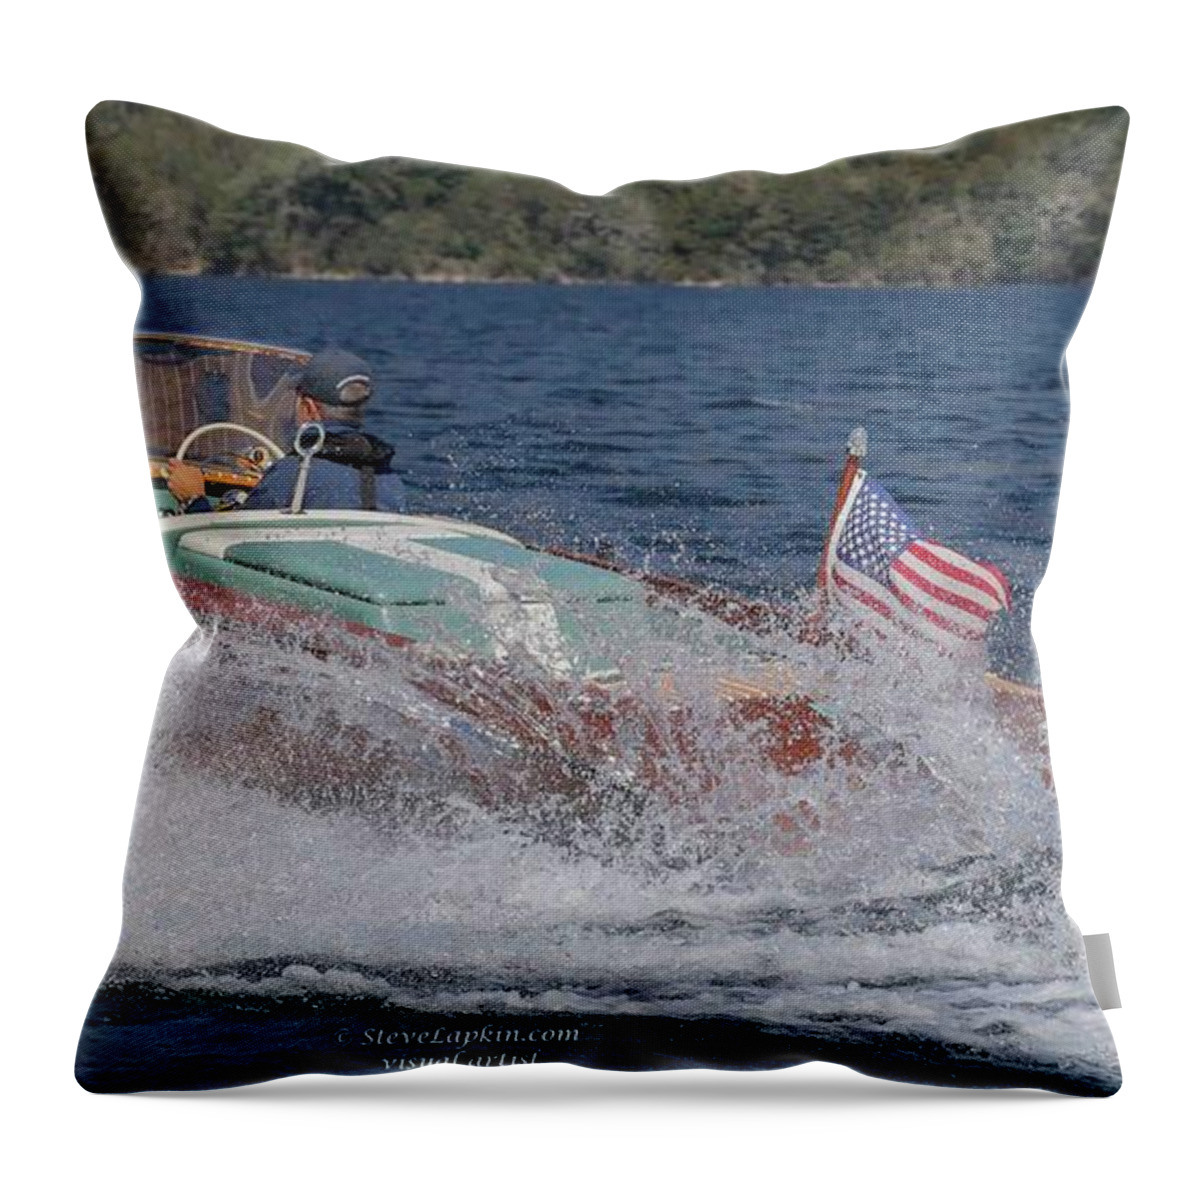 Boat Throw Pillow featuring the photograph Aquarama #12 by Steven Lapkin